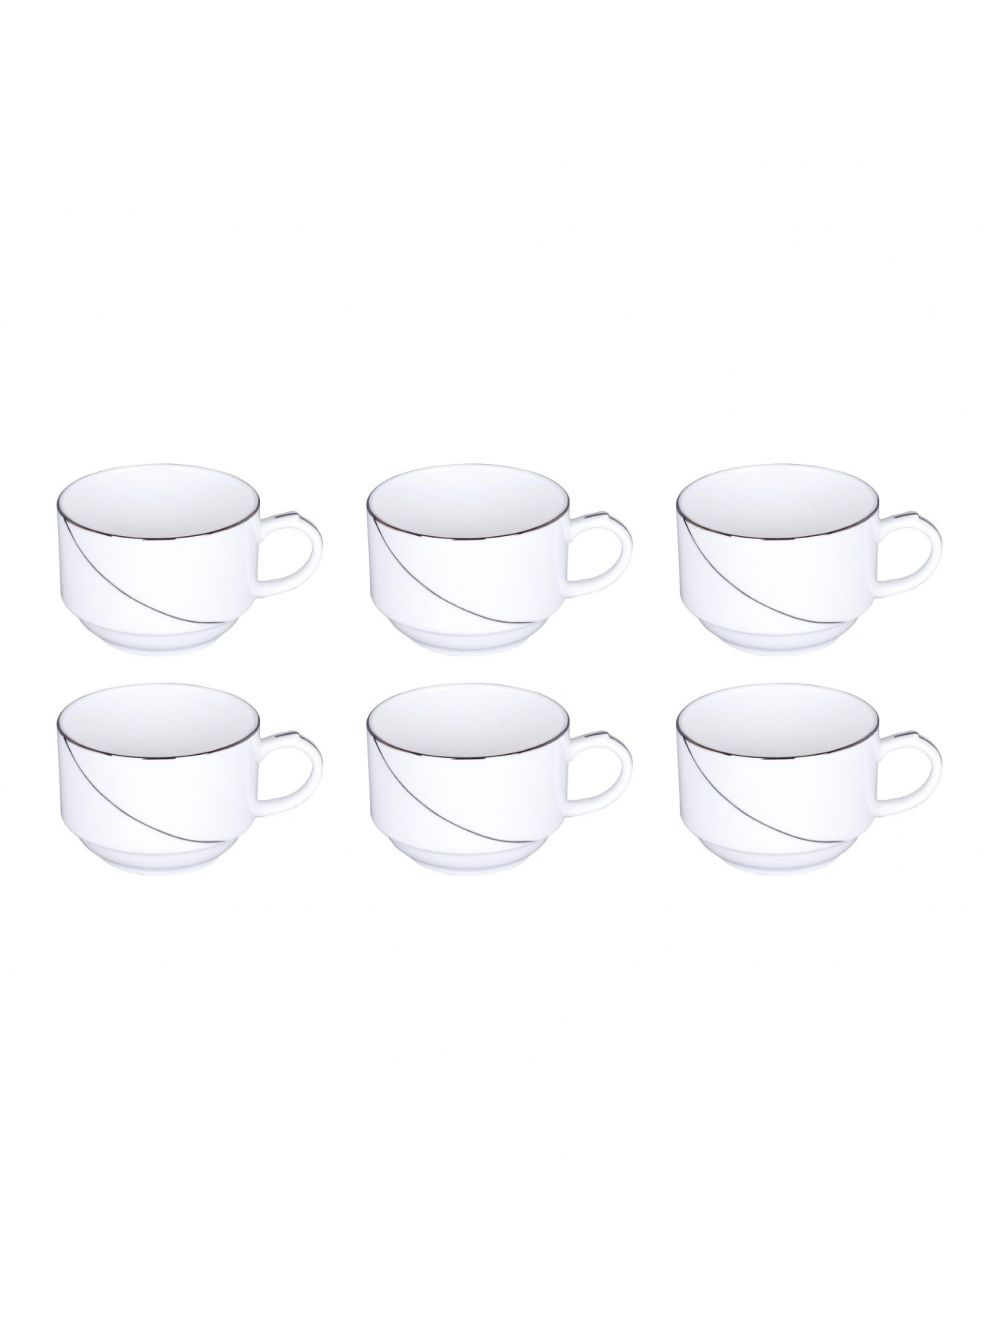 Royalford RF7227 New Bone China Cups with Silver Line, 6 Pcs